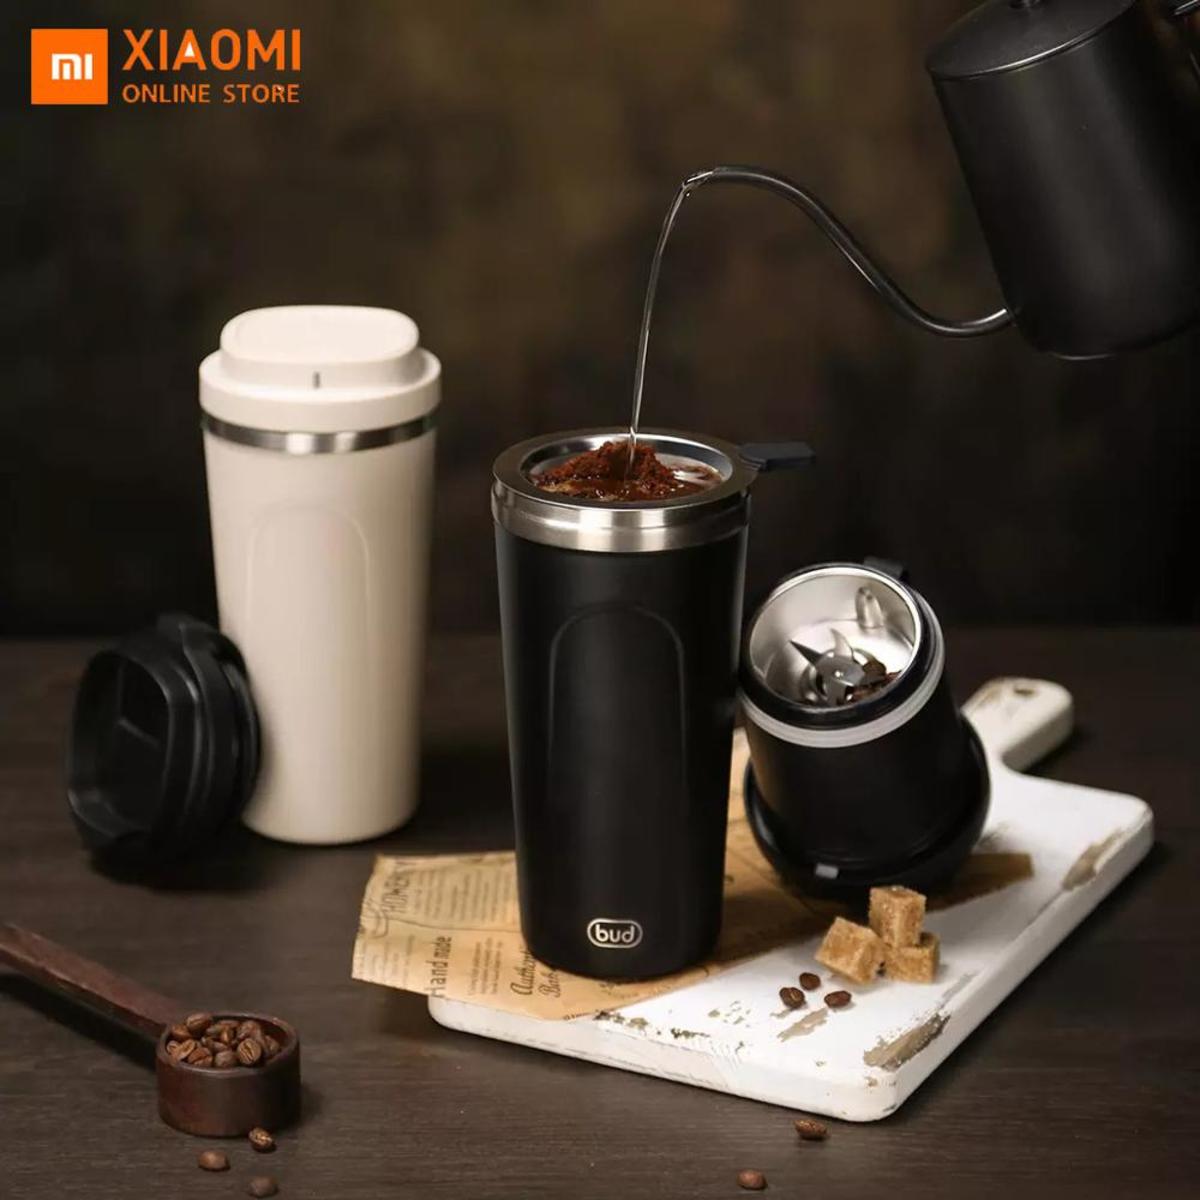 Product Review - Xiaomi Coffee Grinder Bud